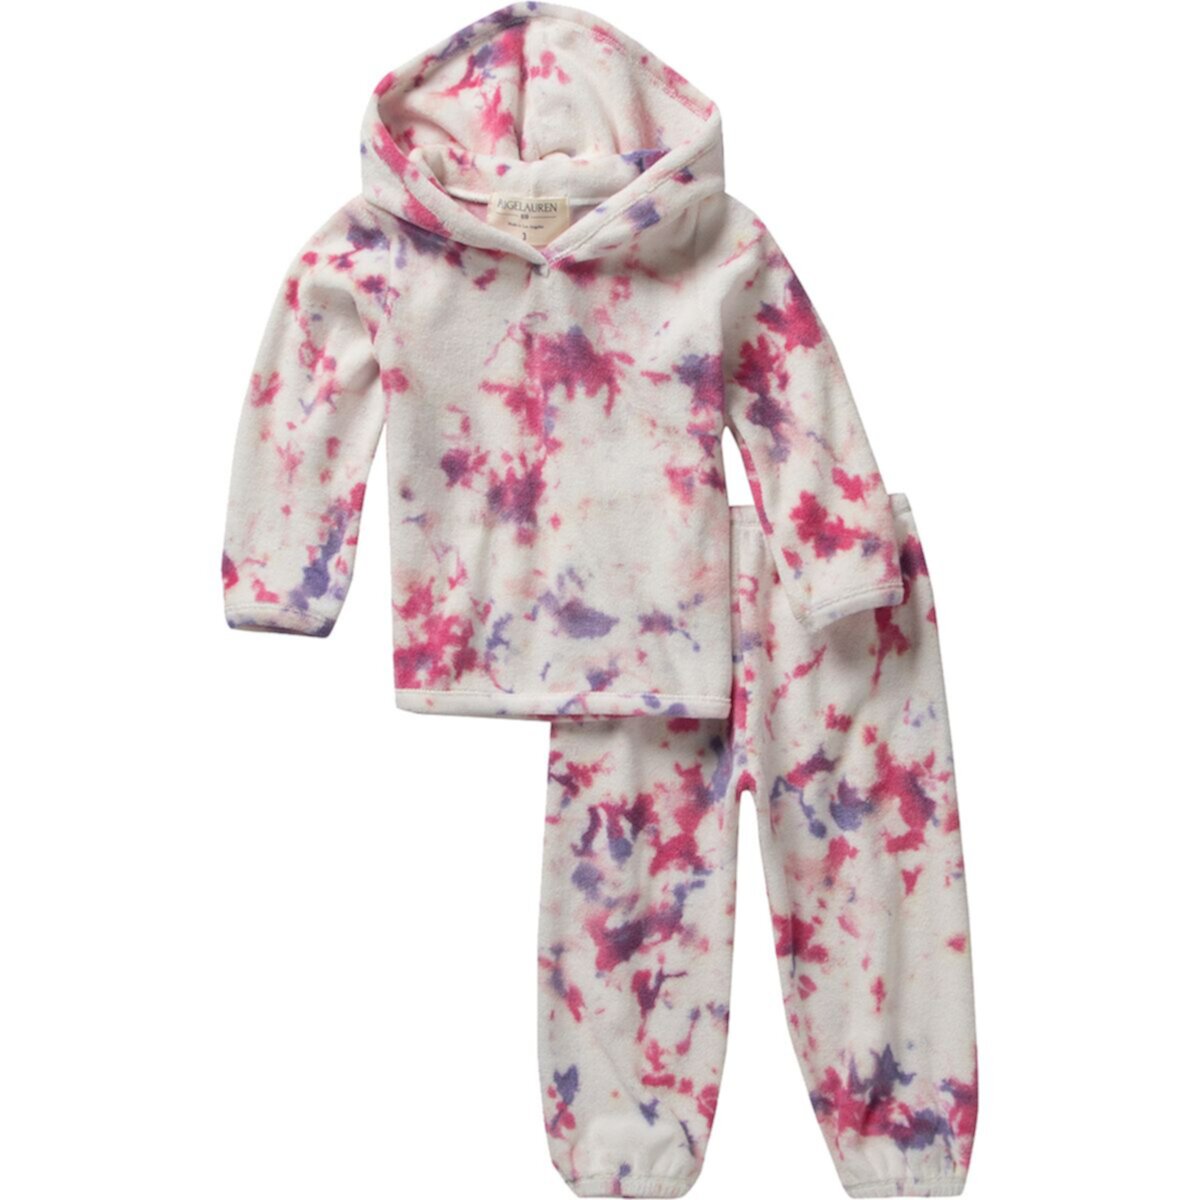 French Terry Splatter Hoodie & Balloon Pant Set - Toddlers' PaigeLauren